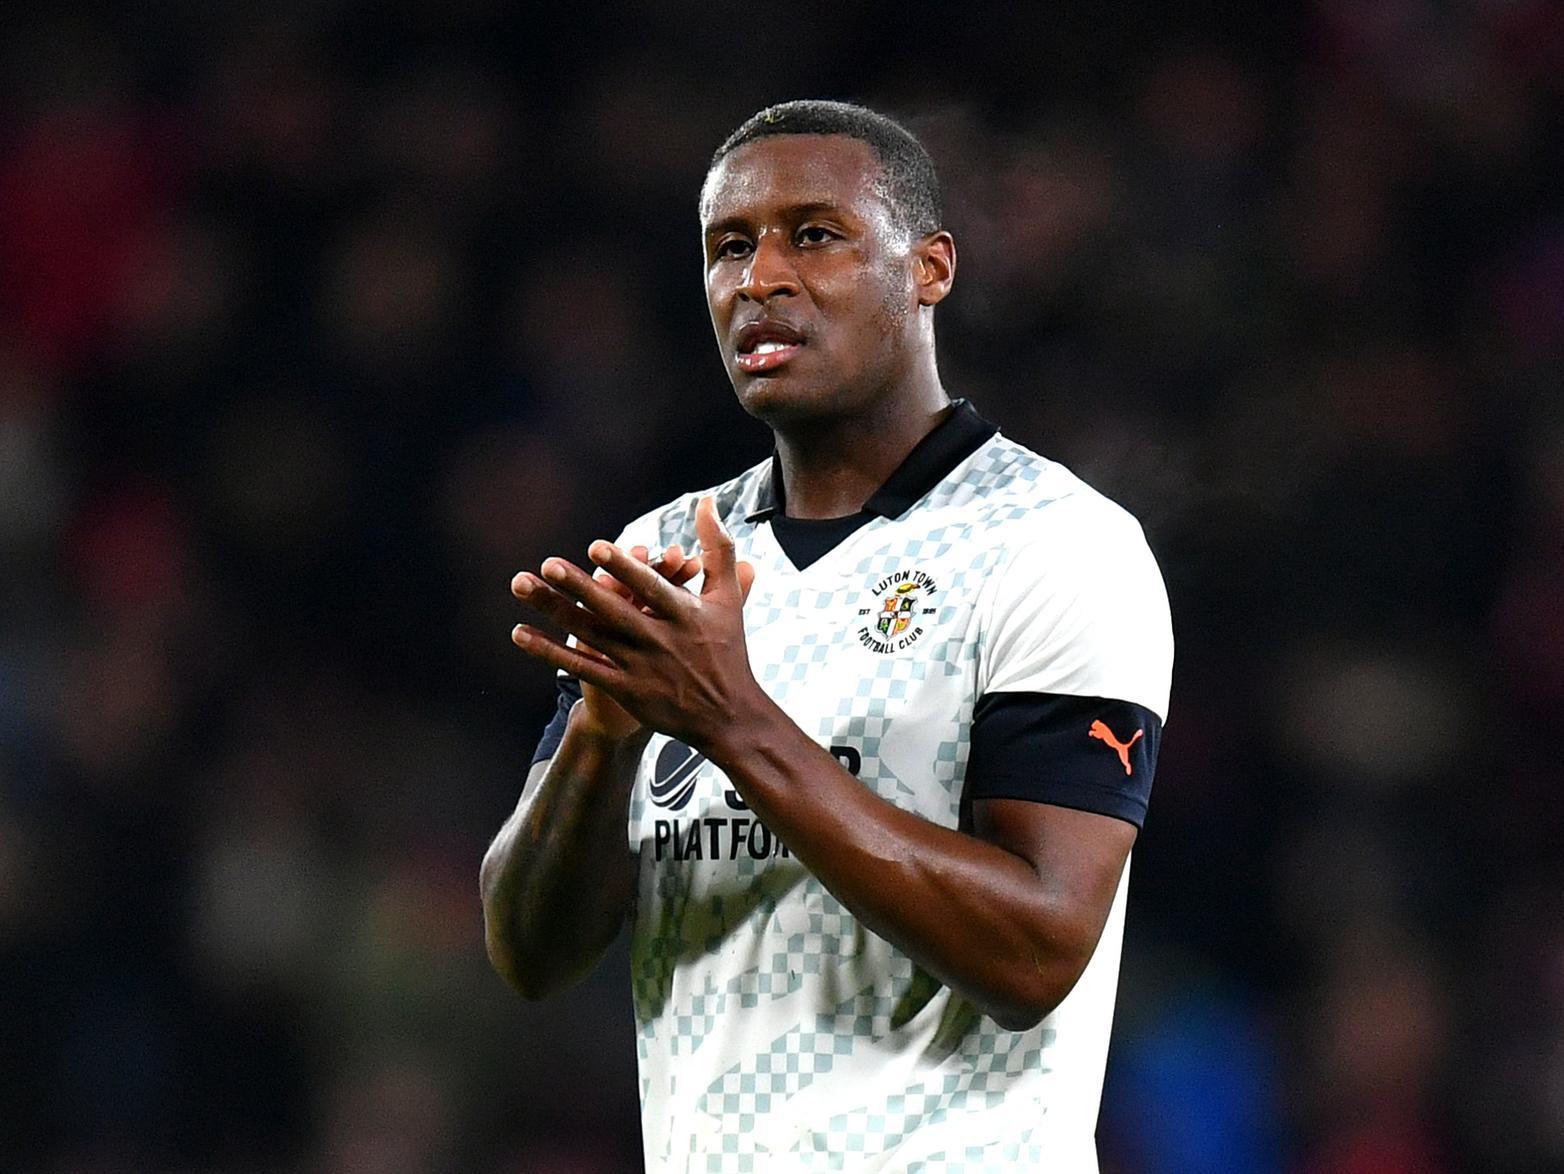 Luton Town's Donervon Daniels admitted that he didn't find out until the day before that'd he'd be making his Hatters debut against Bournemouth, having not trained with his teammates in advance. (Luton Today)